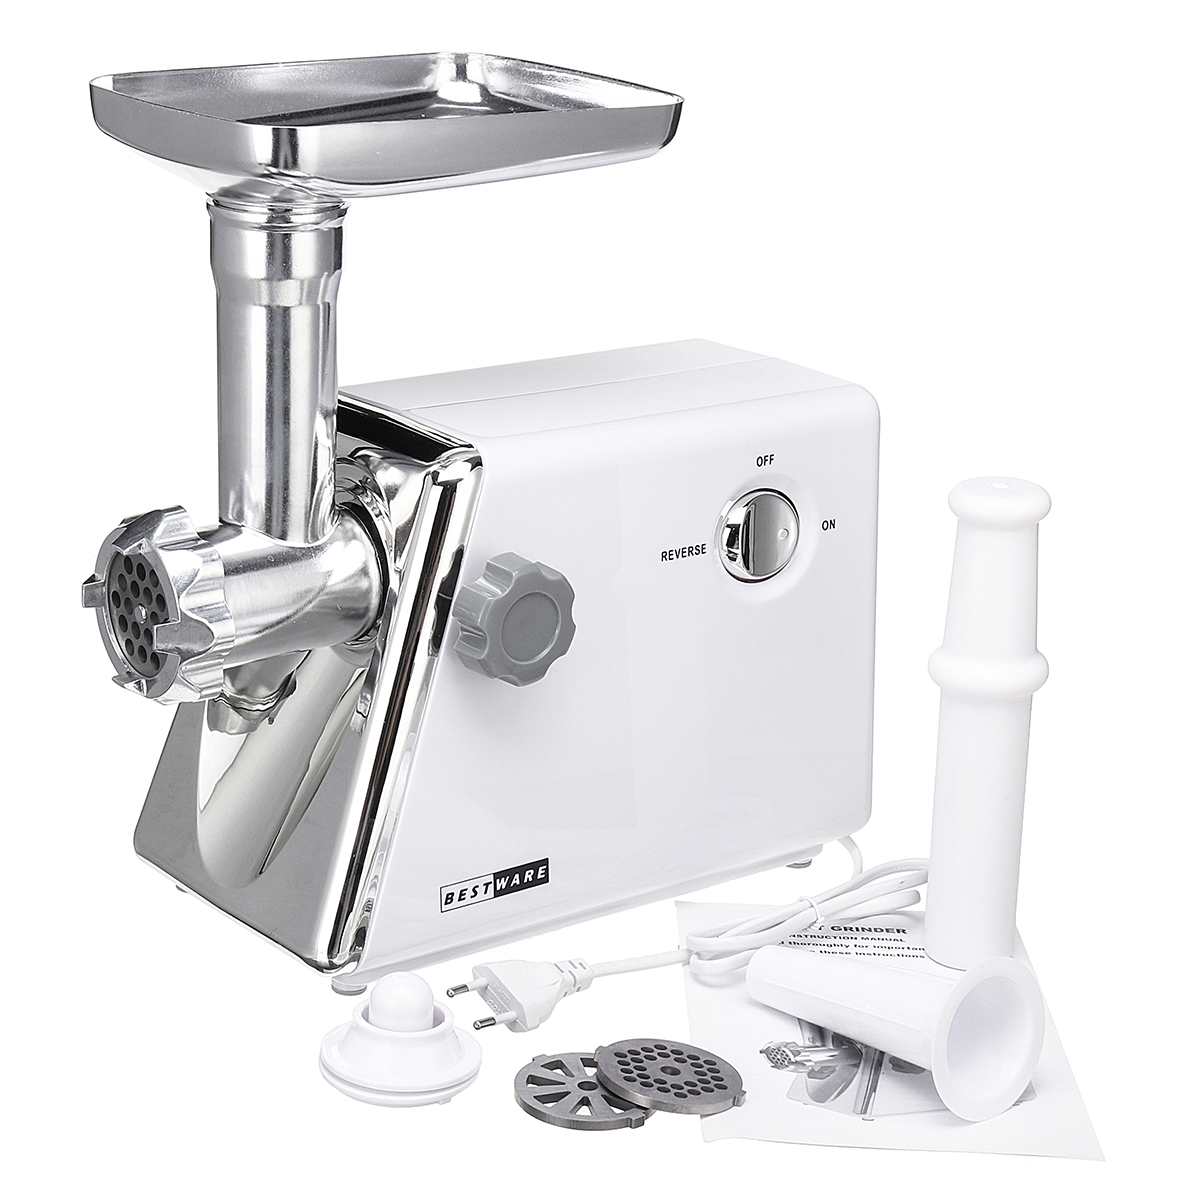 

220V 2800W Electric Meat Grinder Stainless Steel Duty Sausage Stuffer Food Processor Grinding Mincing Stirring Mixing Machine